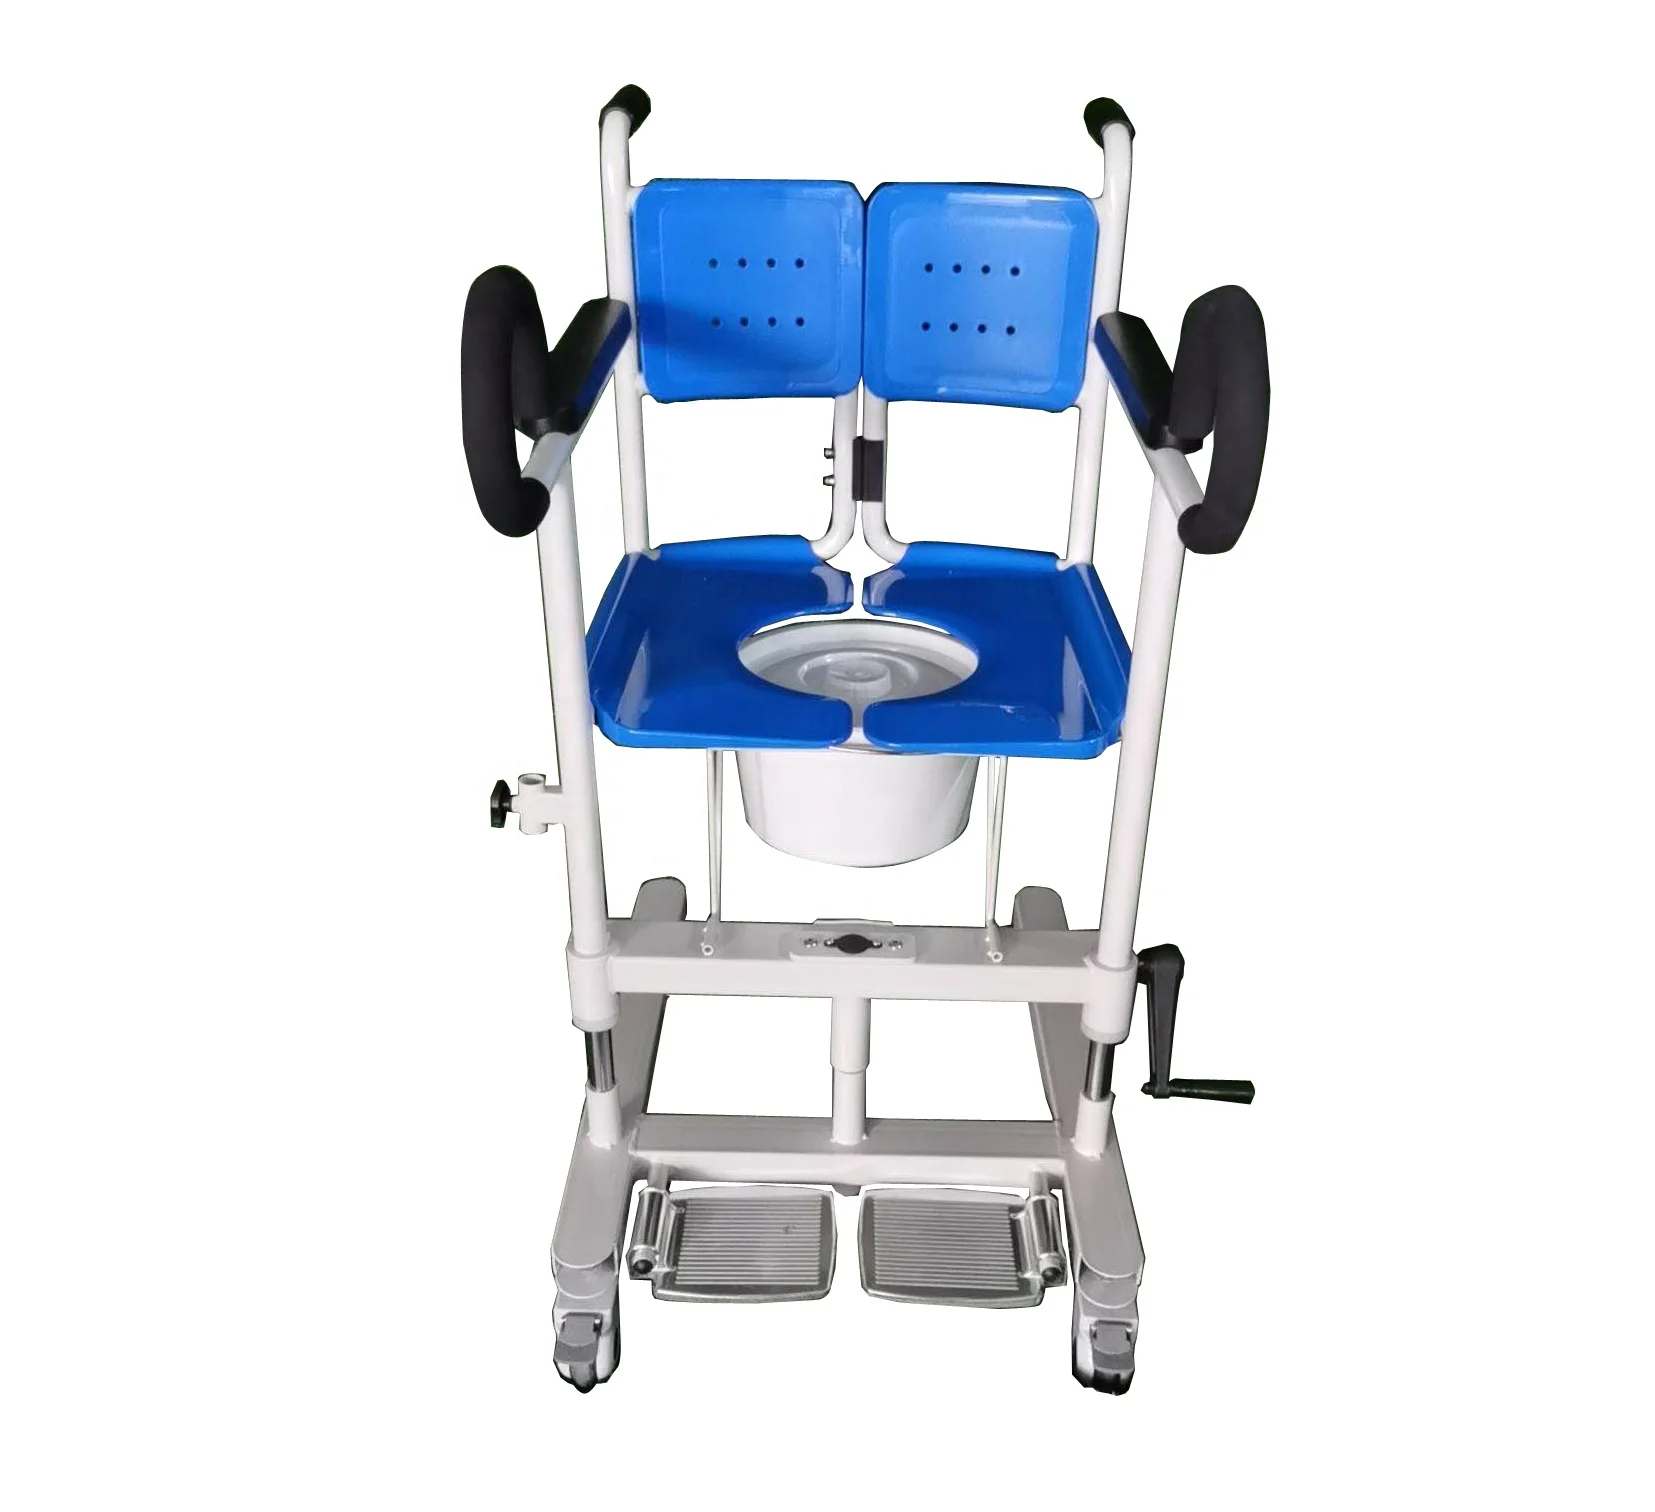 Wheelchair With Toilet Transferable Commode Adjustable Bath Chair Elderly And Disabled Hospital Nursing Commode Chair Buy Cmmode Chair Commode Wheel Chair Transfer Chair Patient Product On Alibaba Com